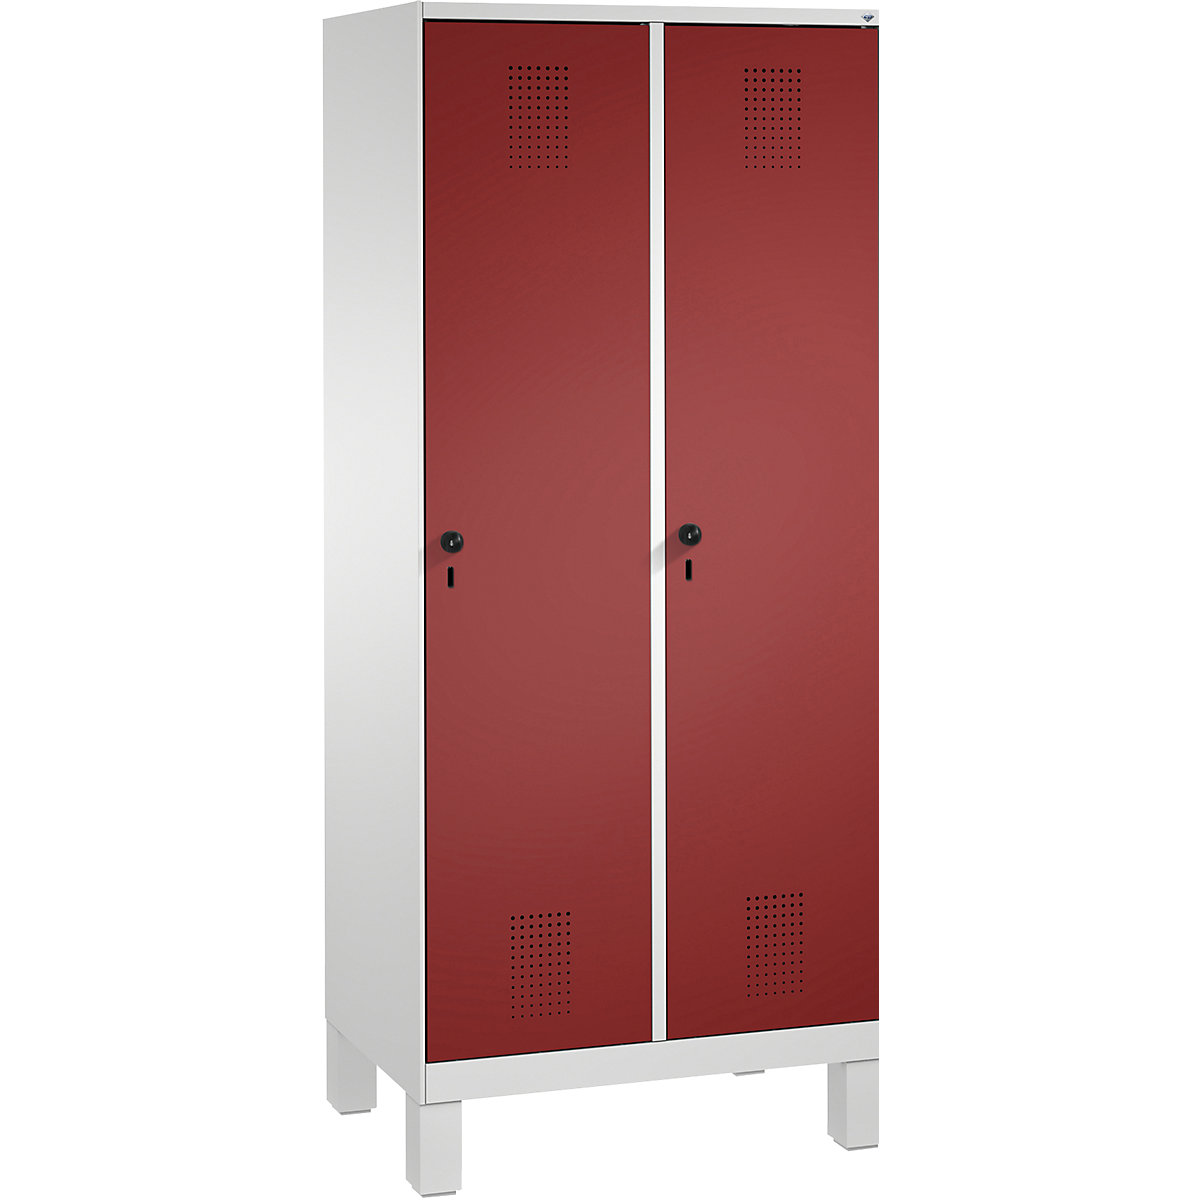 EVOLO cloakroom locker, with feet – C+P, 2 compartments, compartment width 400 mm, light grey / ruby red-13